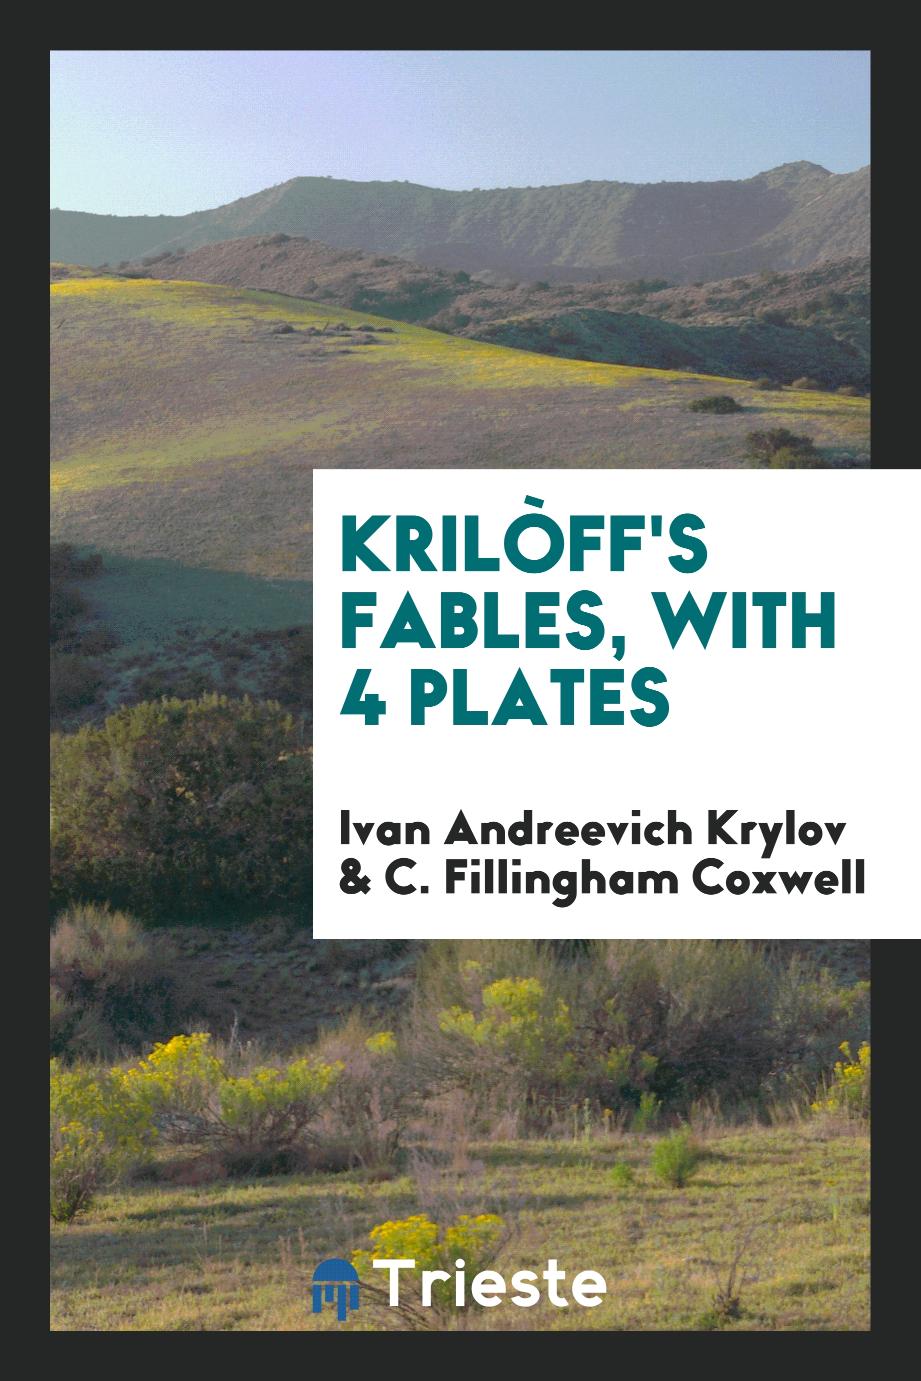 Krilòff's fables, with 4 plates